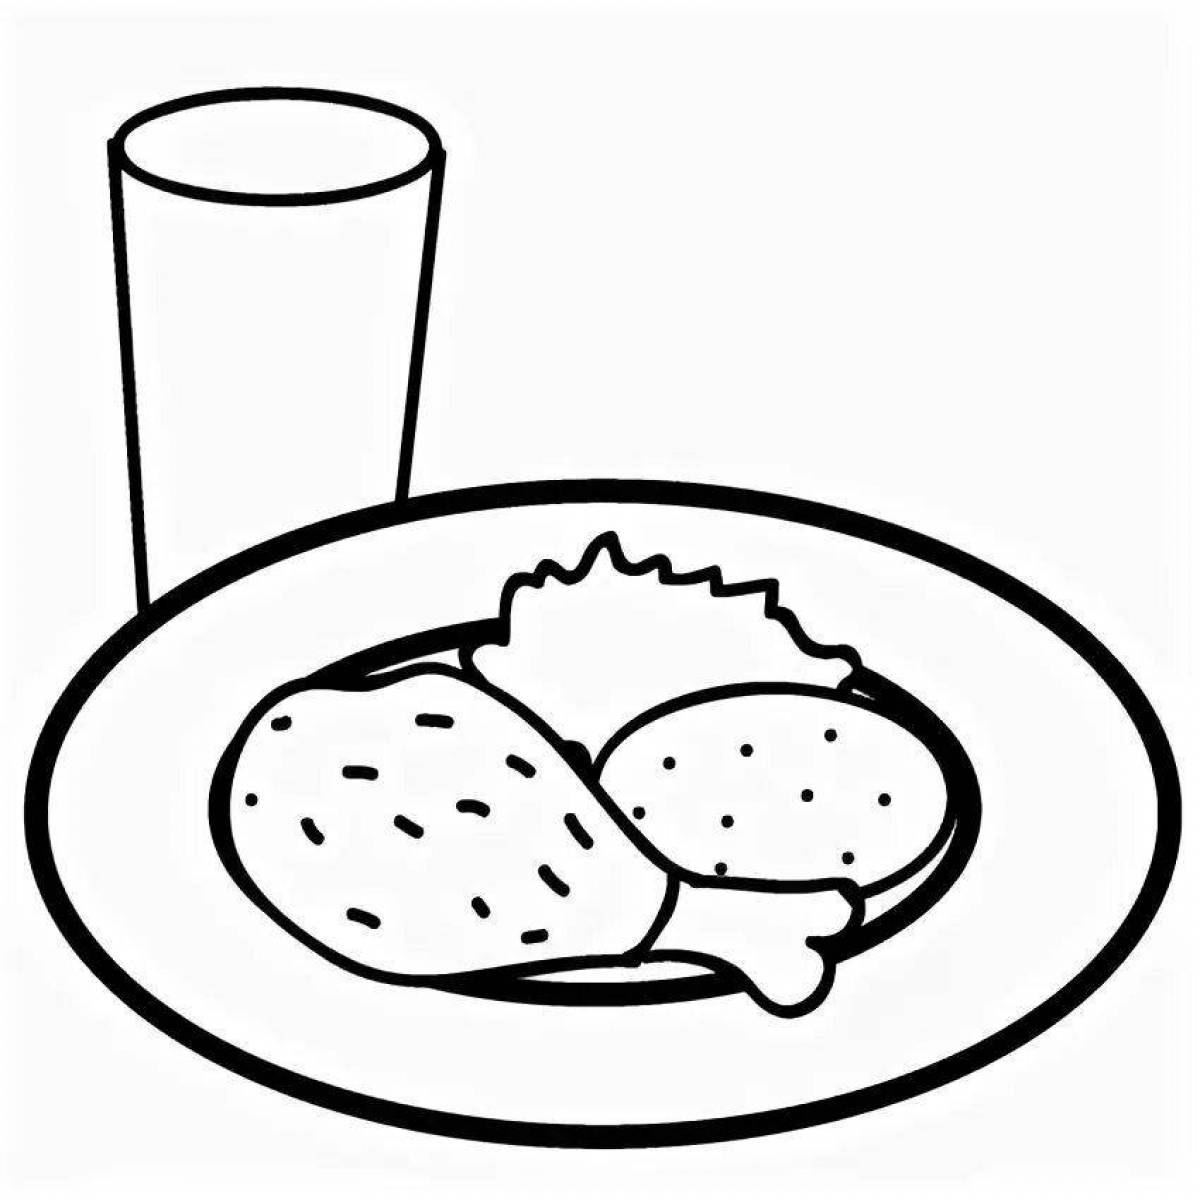 Consolation dinner coloring page